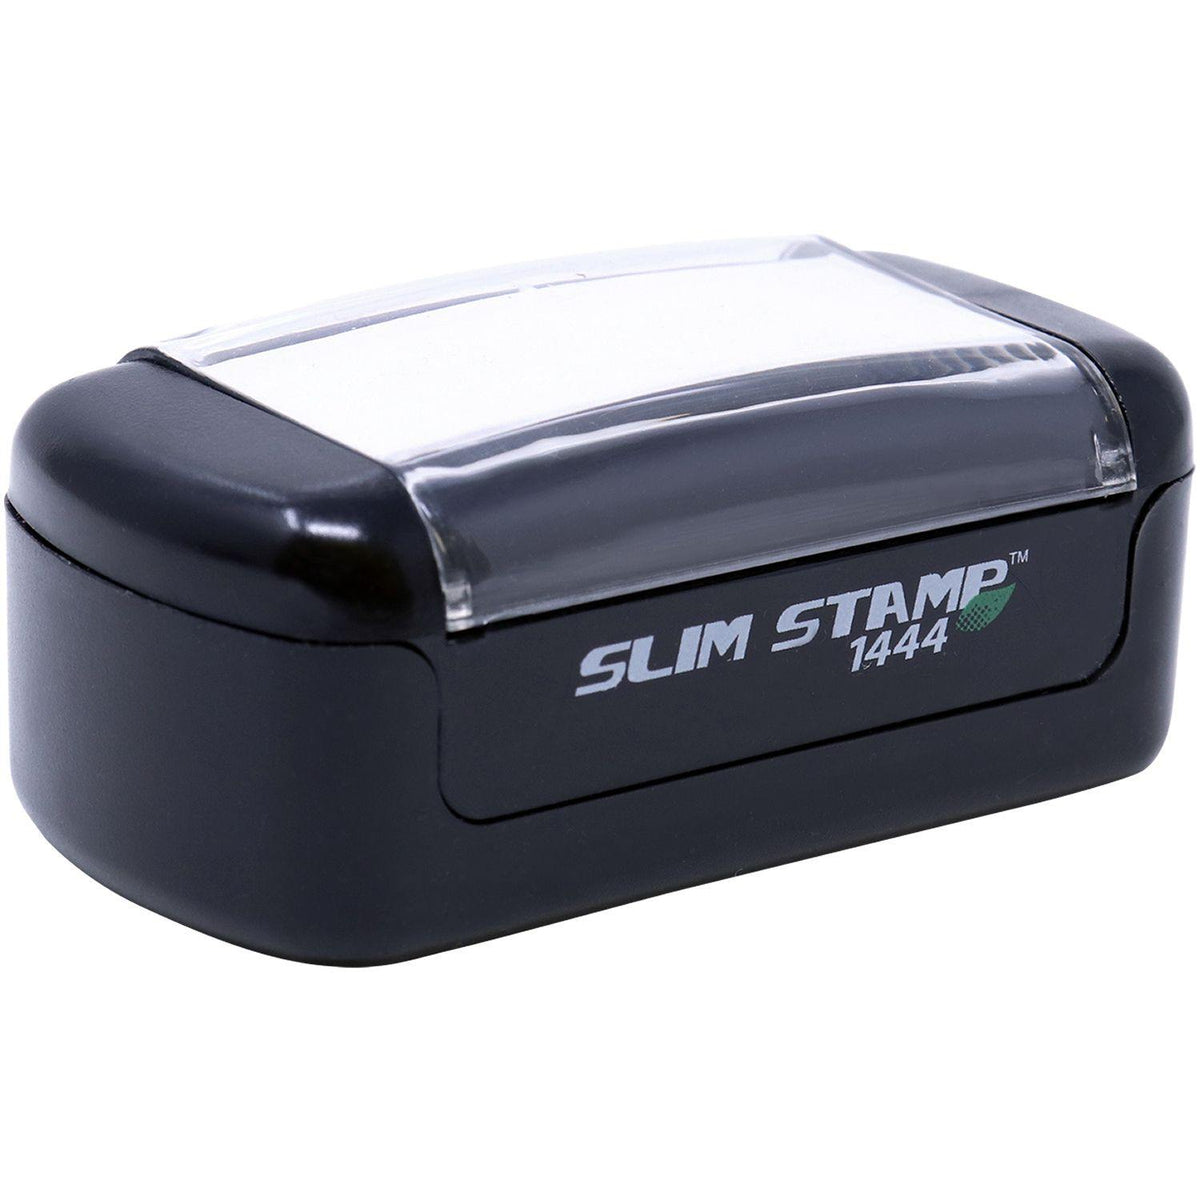 Slim Pre Inked Account Closed Stamp - Engineer Seal Stamps - Brand_Slim, Impression Size_Small, Stamp Type_Pre-Inked Stamp, Type of Use_Business, Type of Use_Finance